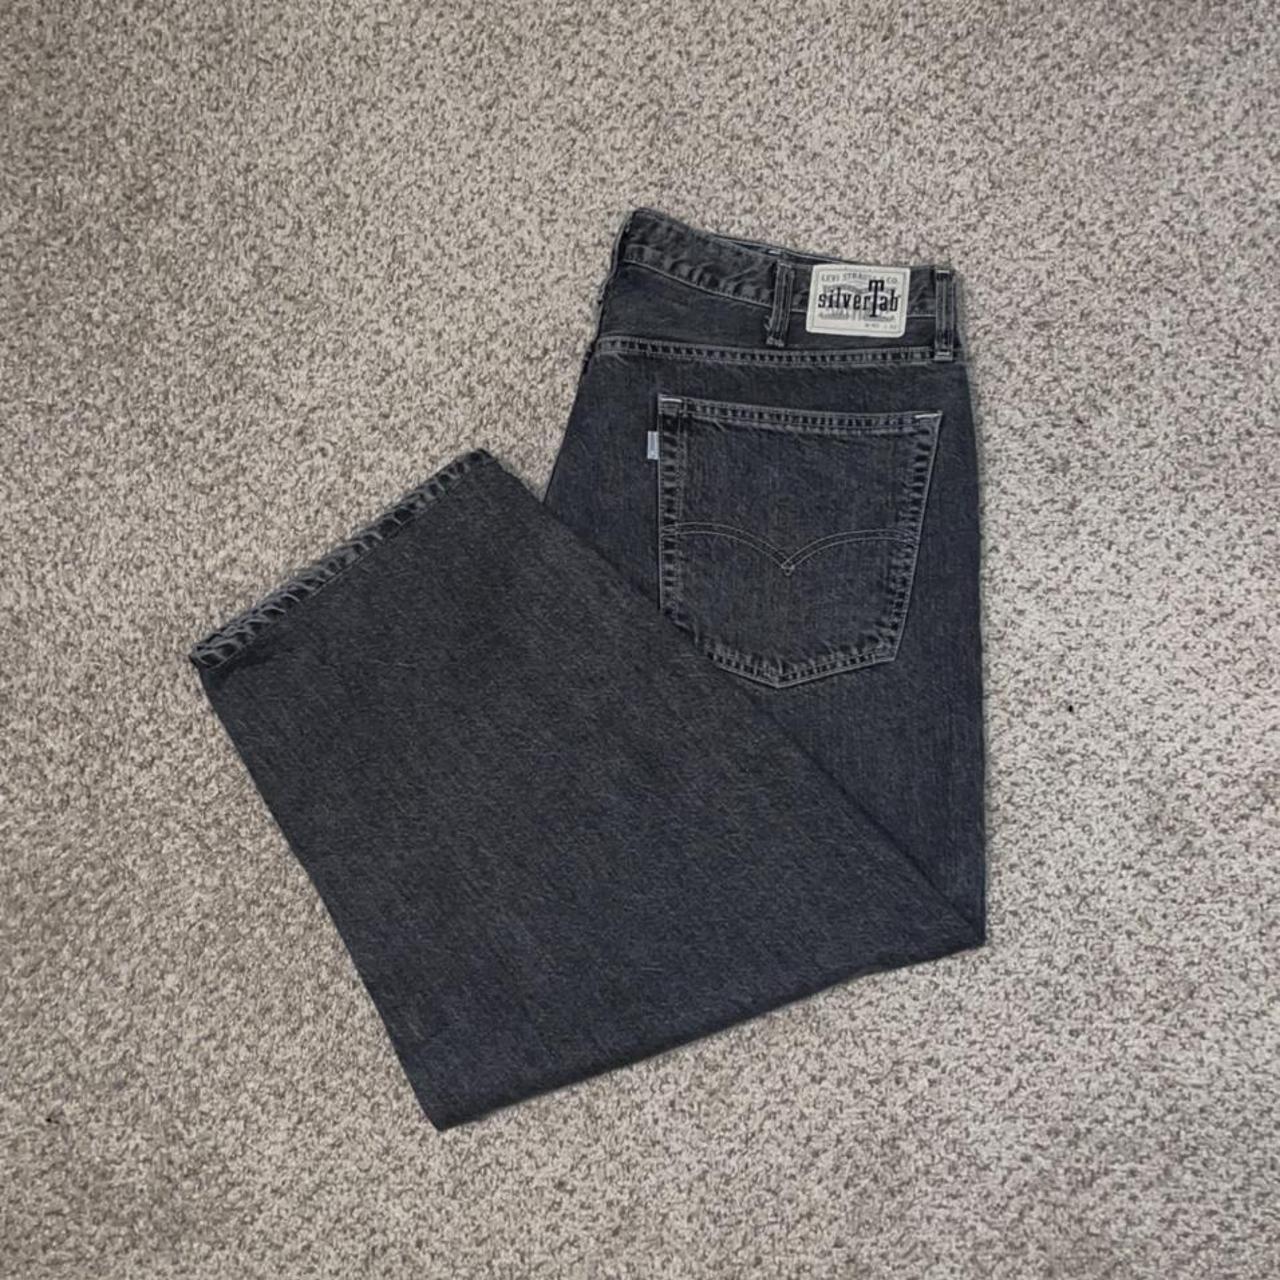 Product Image 2 - -Levi’s Silvertab “baggy” jeans from